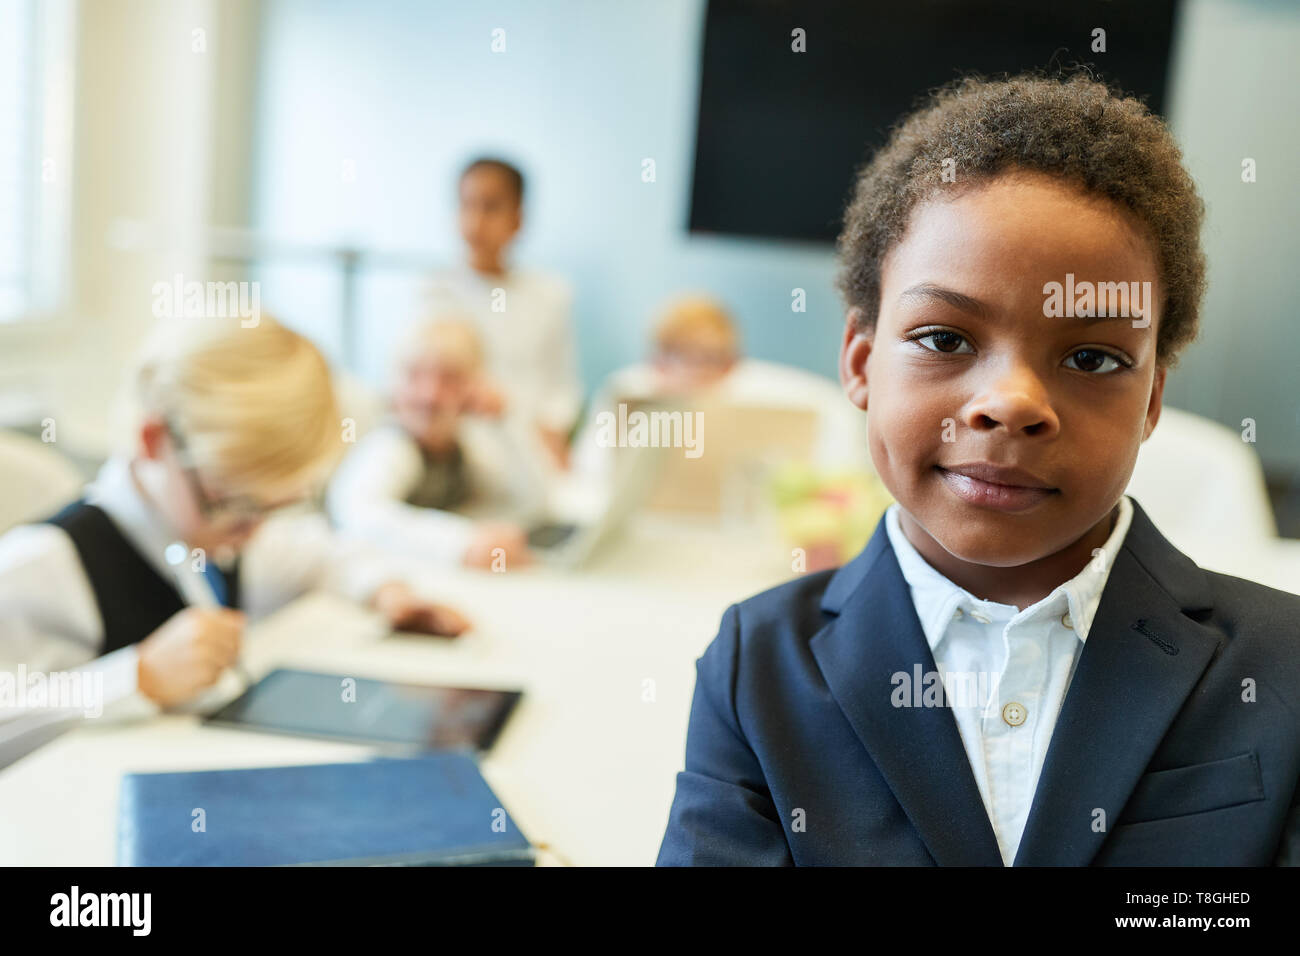 African child as a businessman or entrepreneur in front of his business team Stock Photo